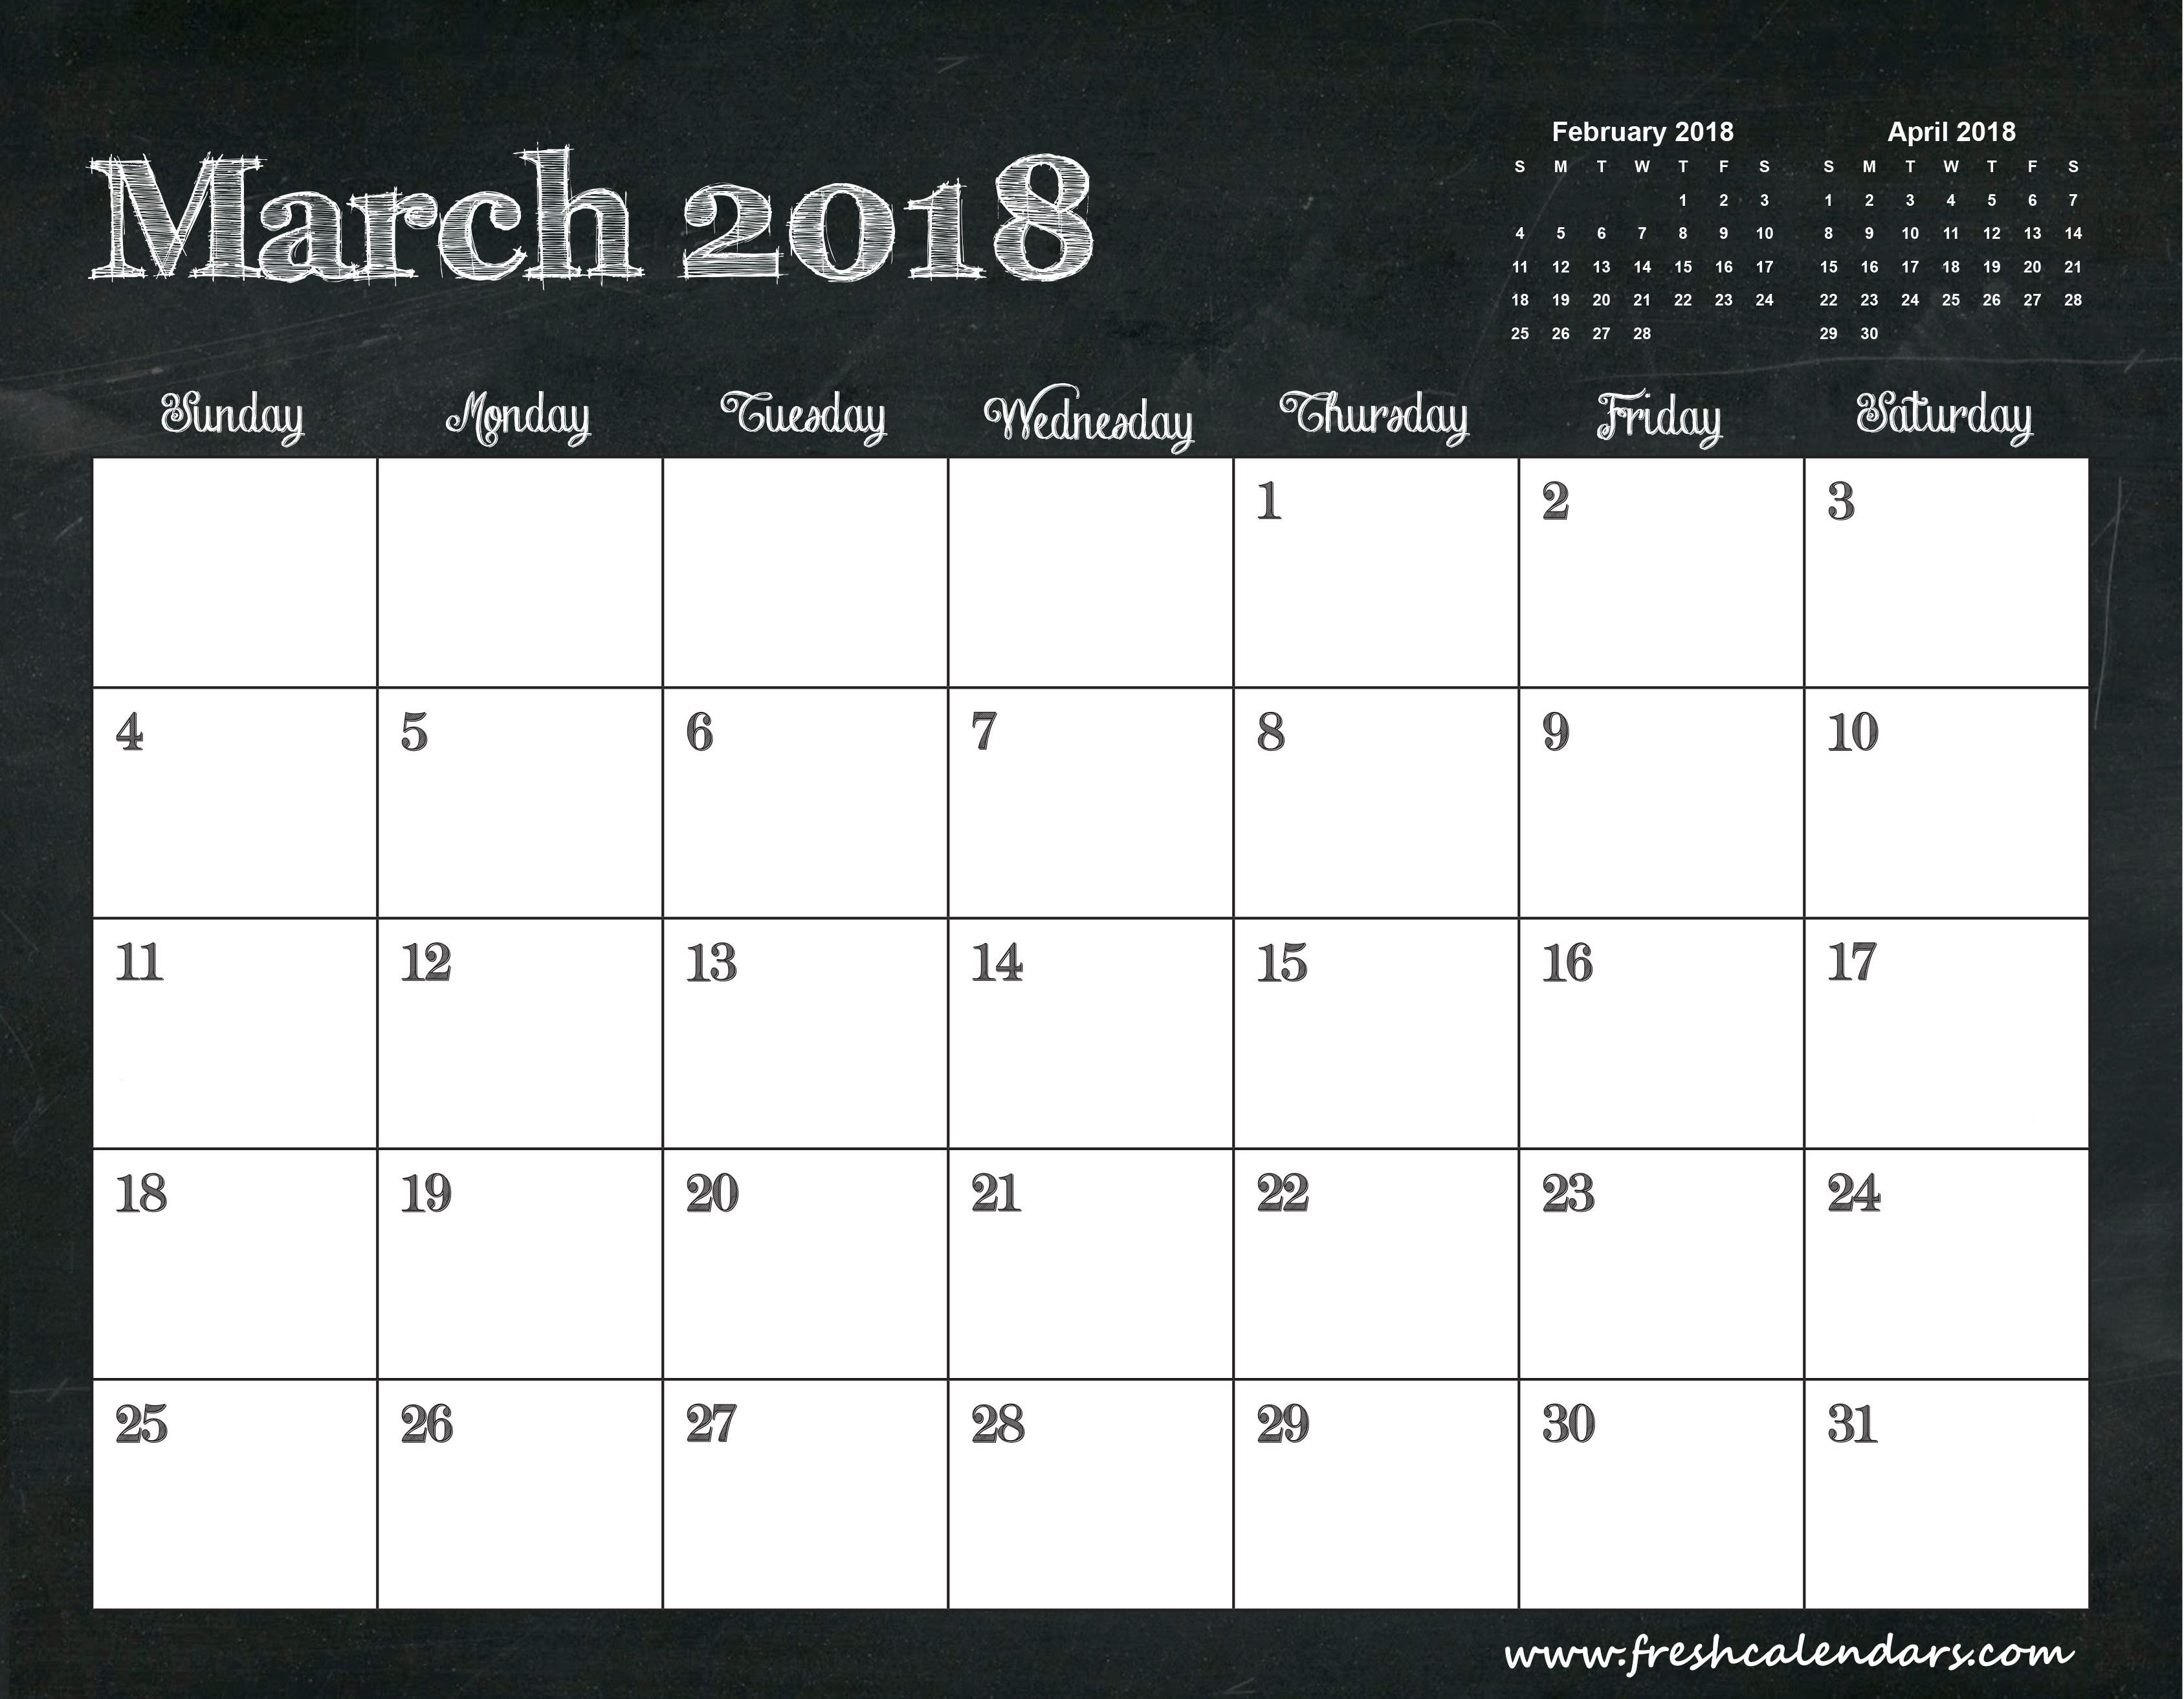 free-5-march-2018-calendar-printable-template-source-template